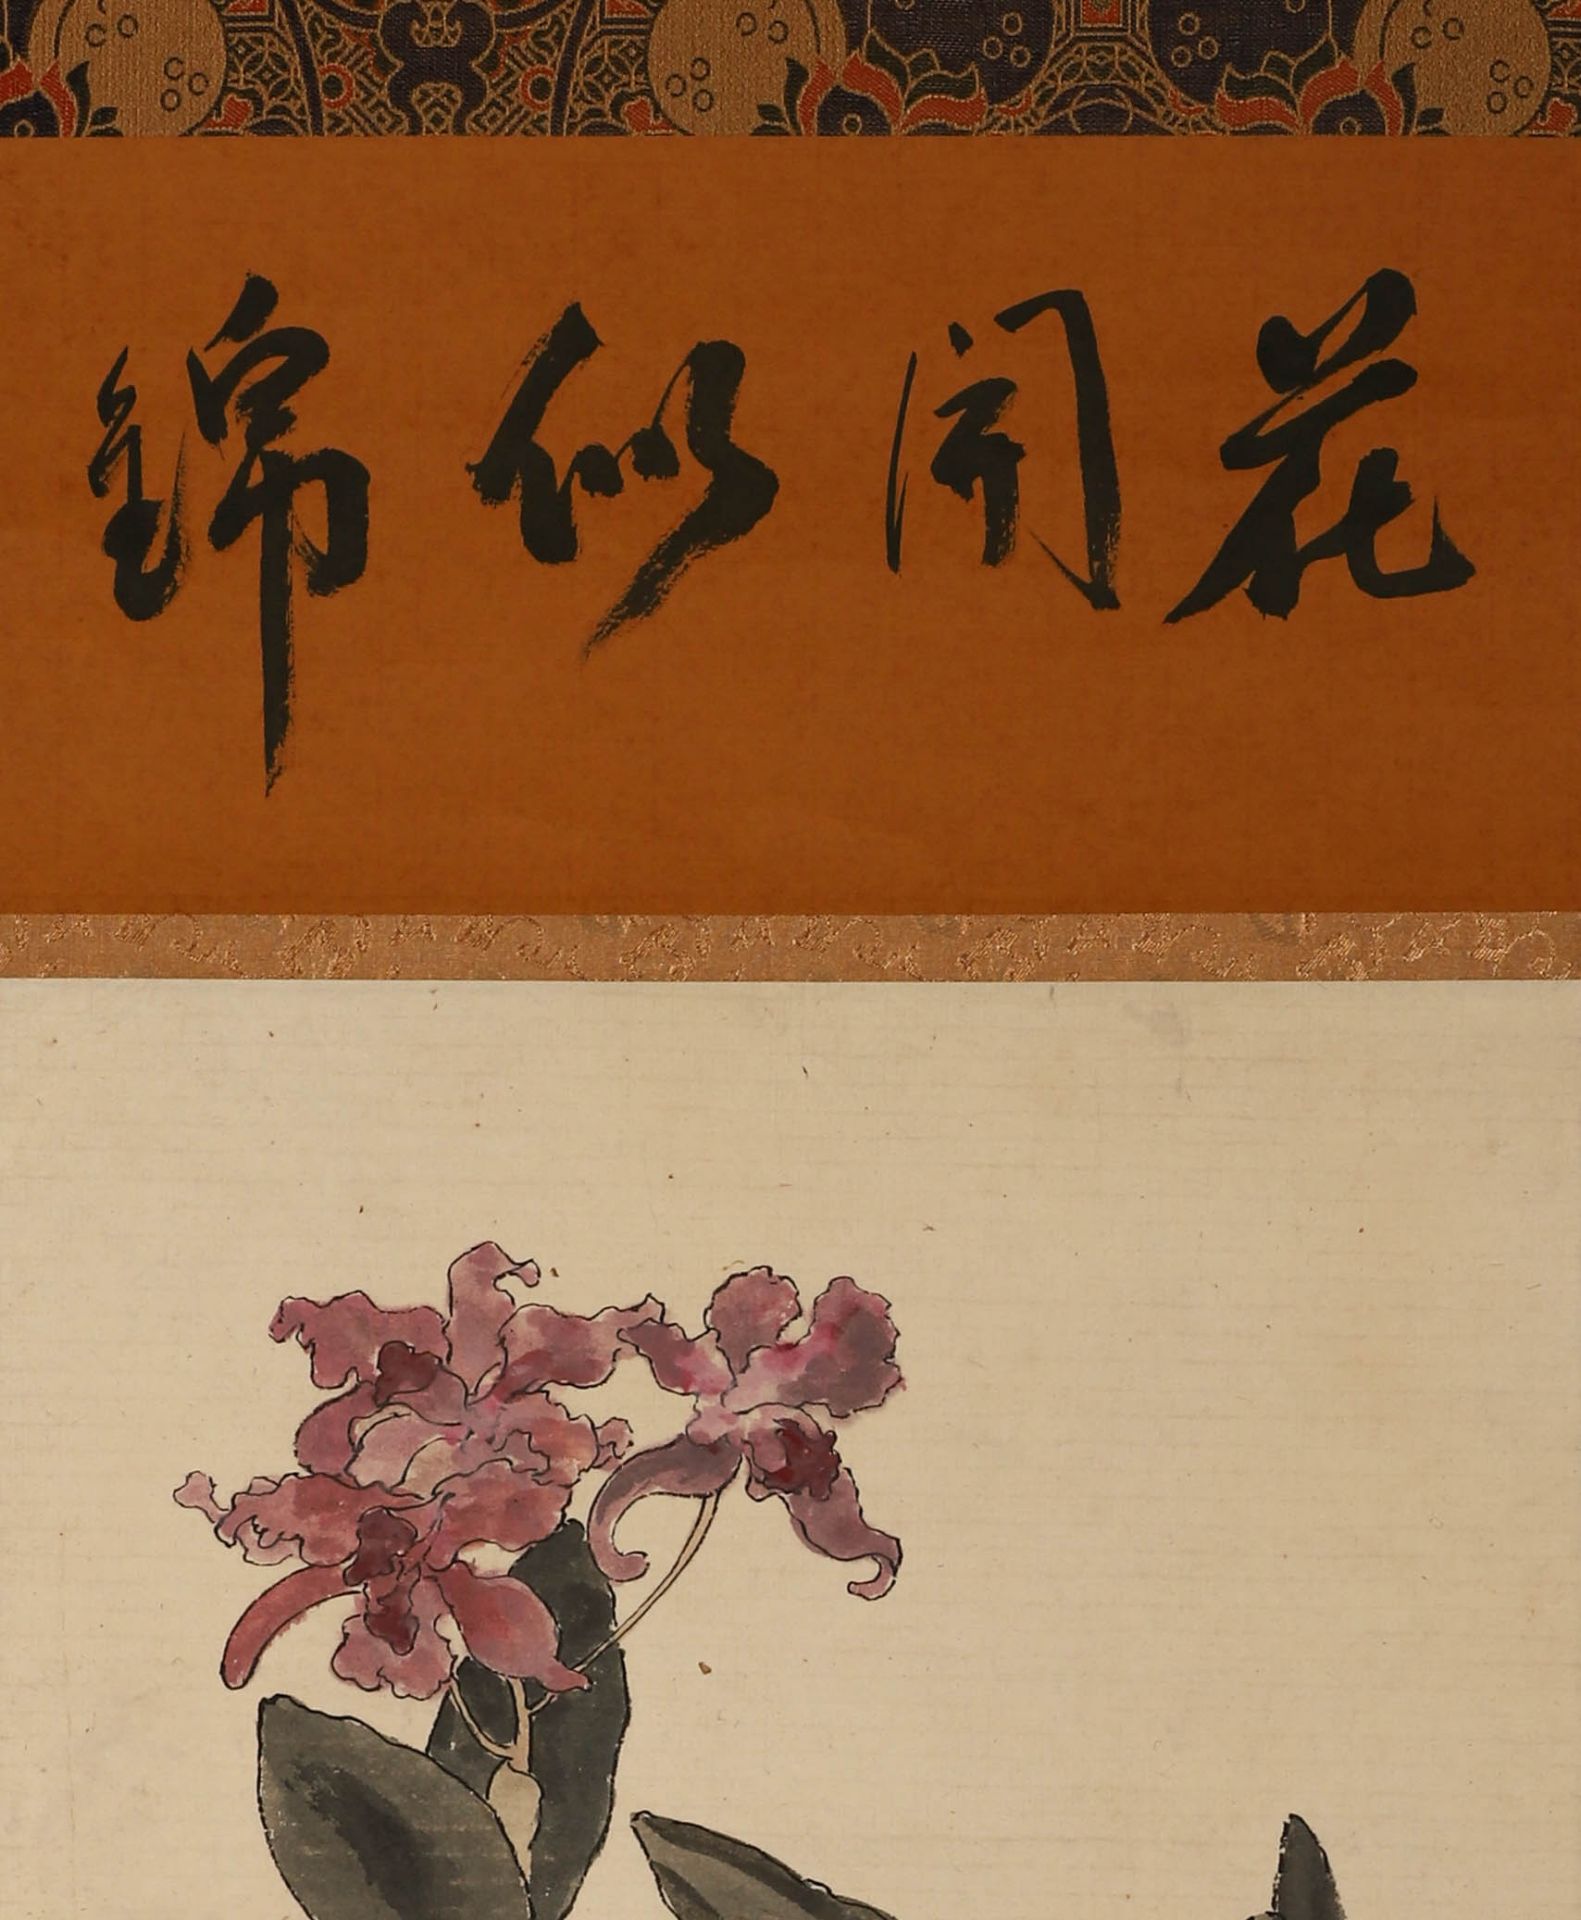 Flowers painting on paper by Xu Beihong  - Image 10 of 22